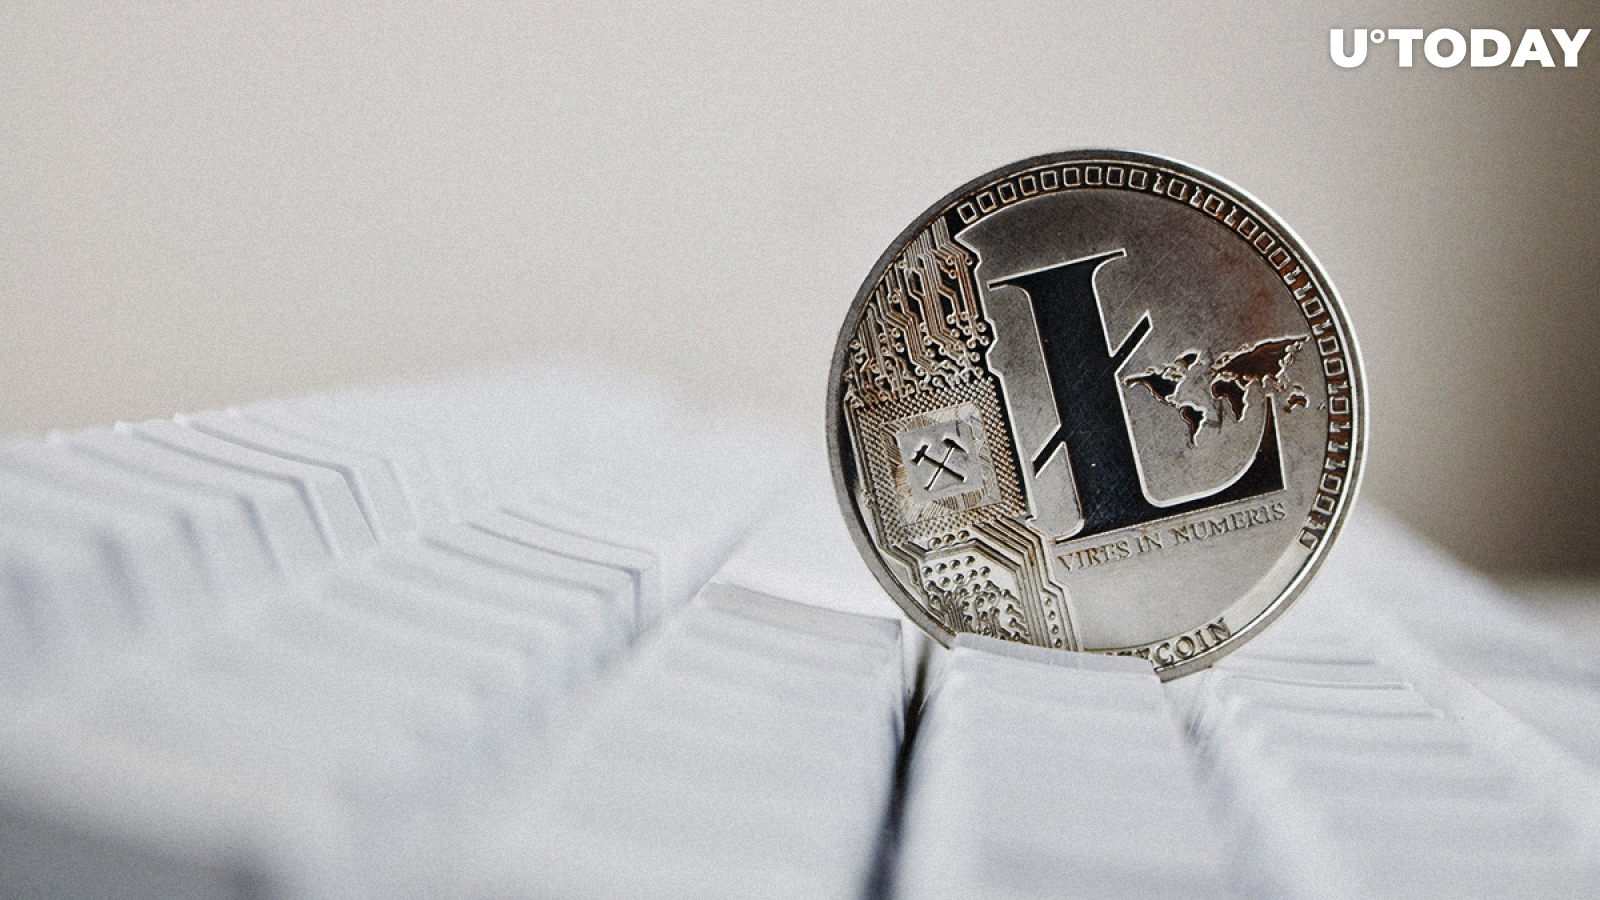  Litecoin (LTC) Payments Added by Travala, DLT Hotel Booker, TRX Already On the List